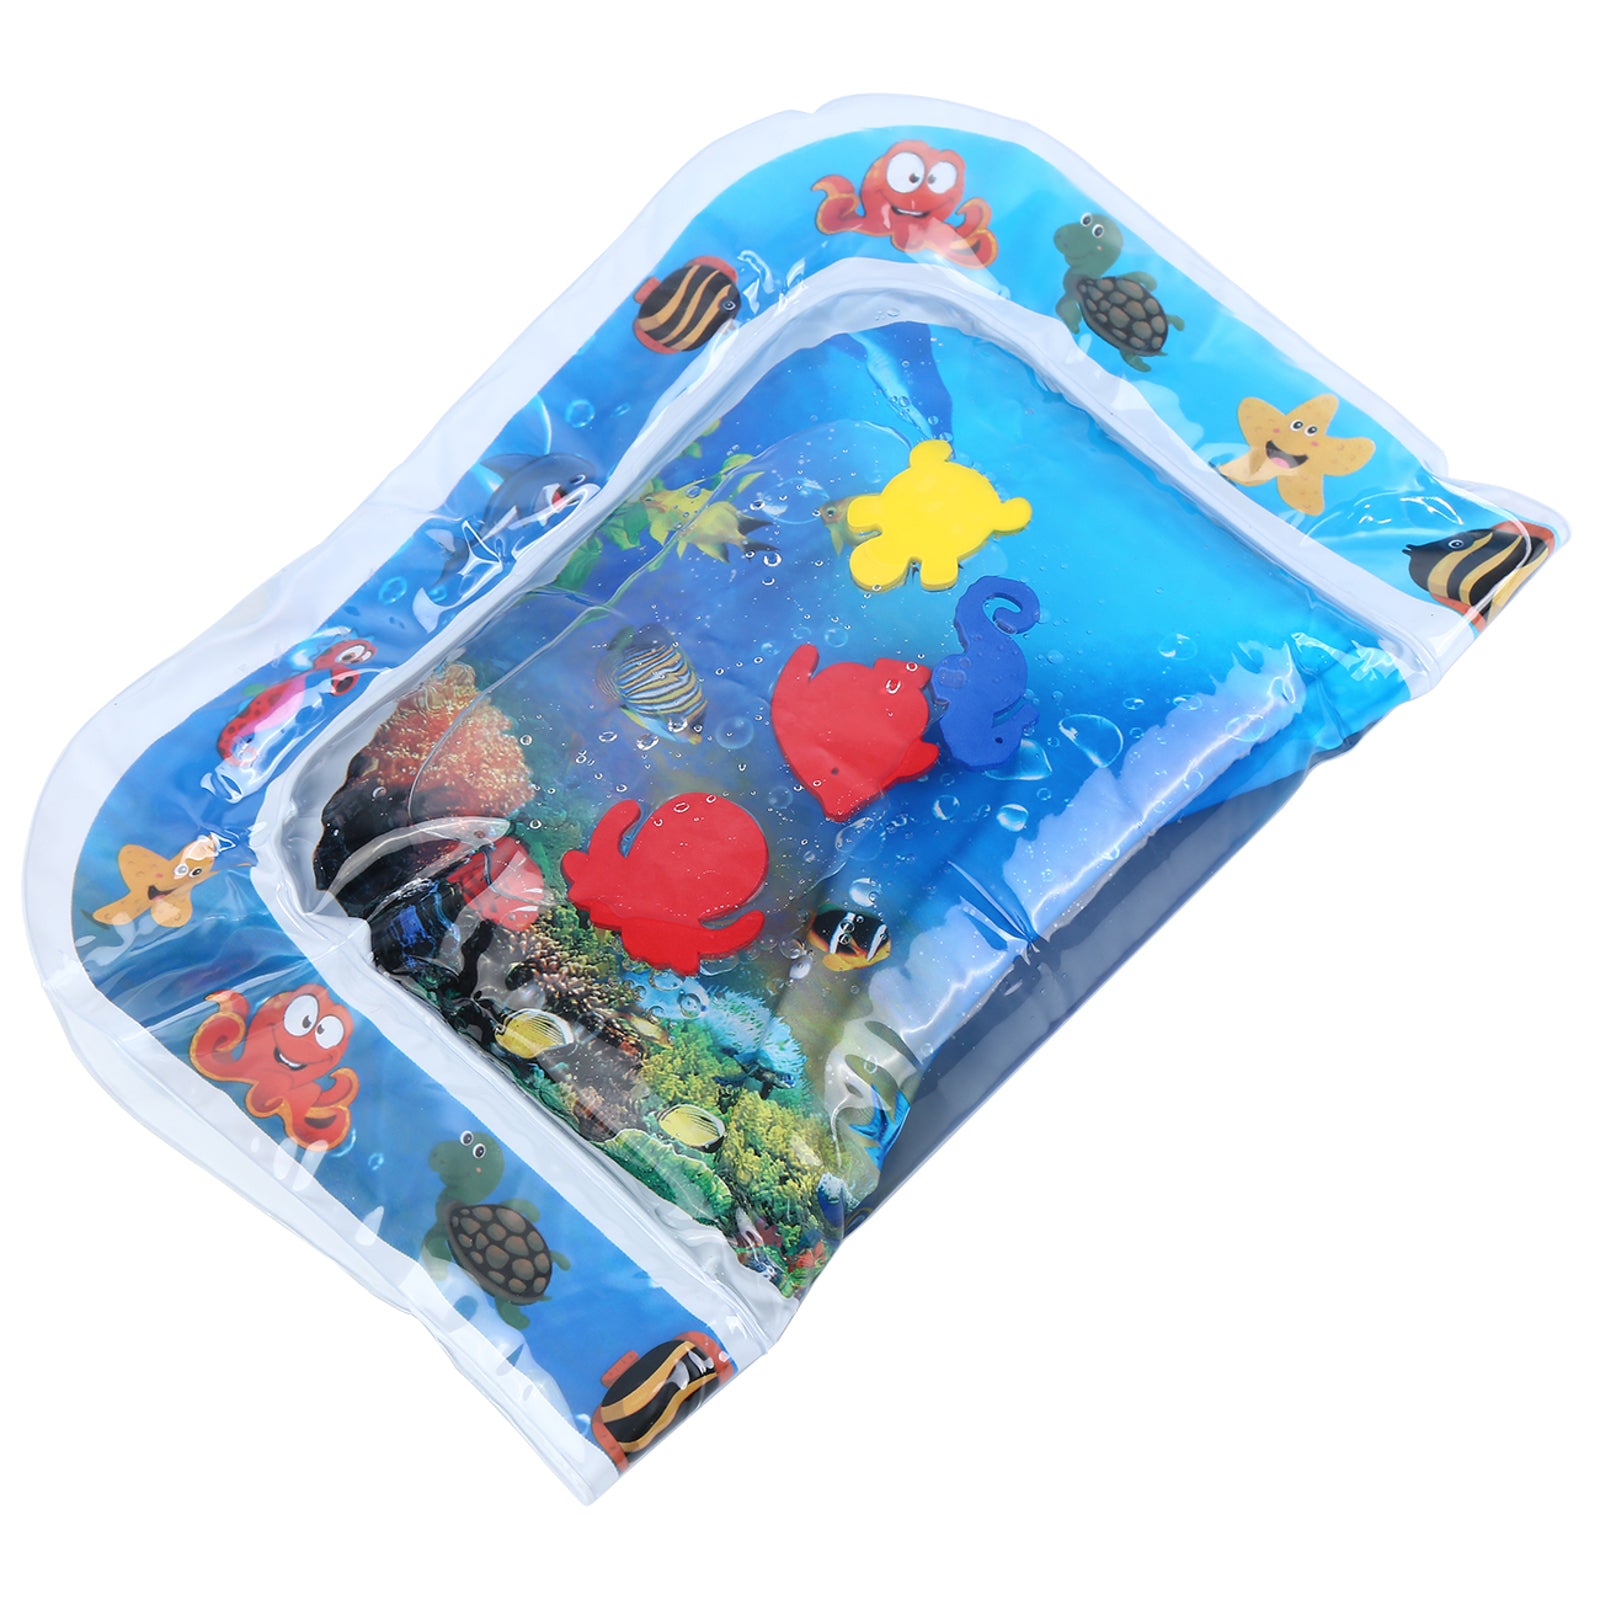 Inflatable Tummy Time Premium Water Mat Infants and Toddlers is The Perfect Fun time Play Activity to Center Your Baby's Stimulation Growth